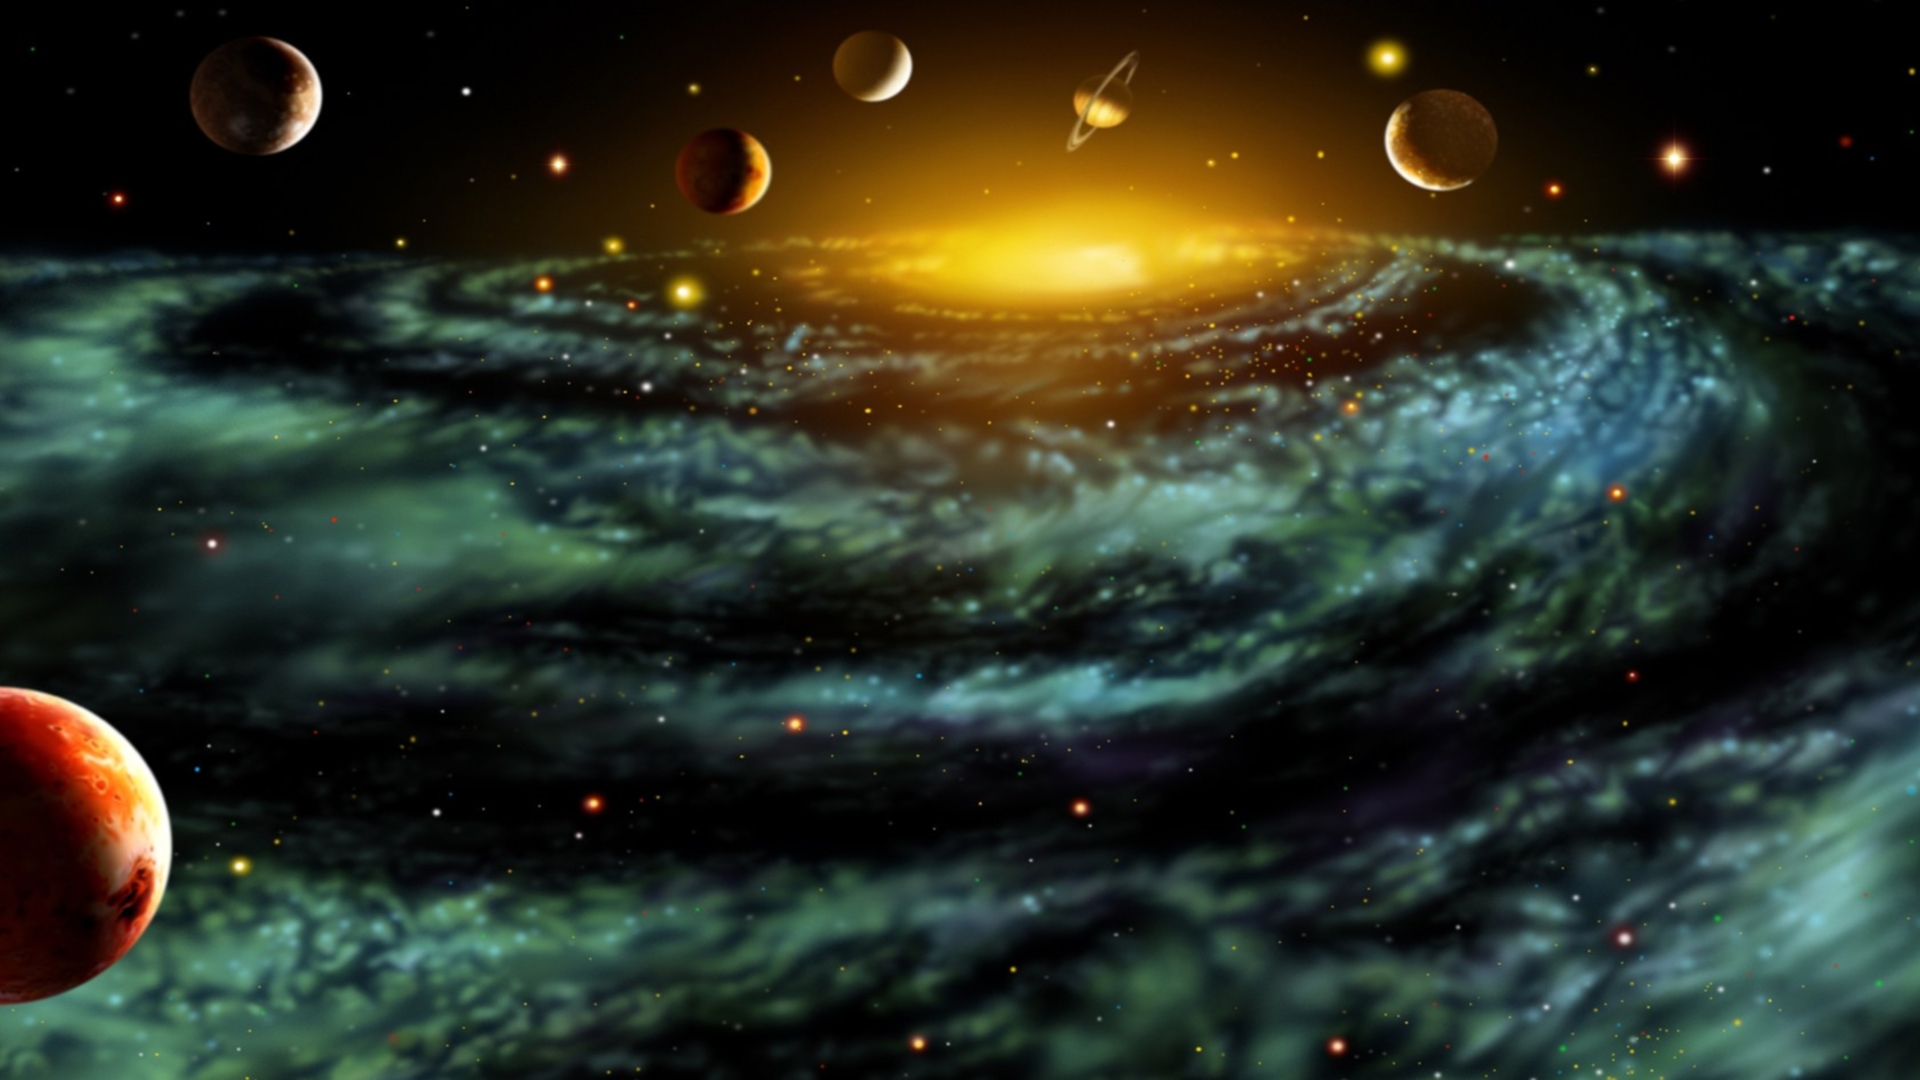 Here are some awesome space wallpapers in HD for your desktop